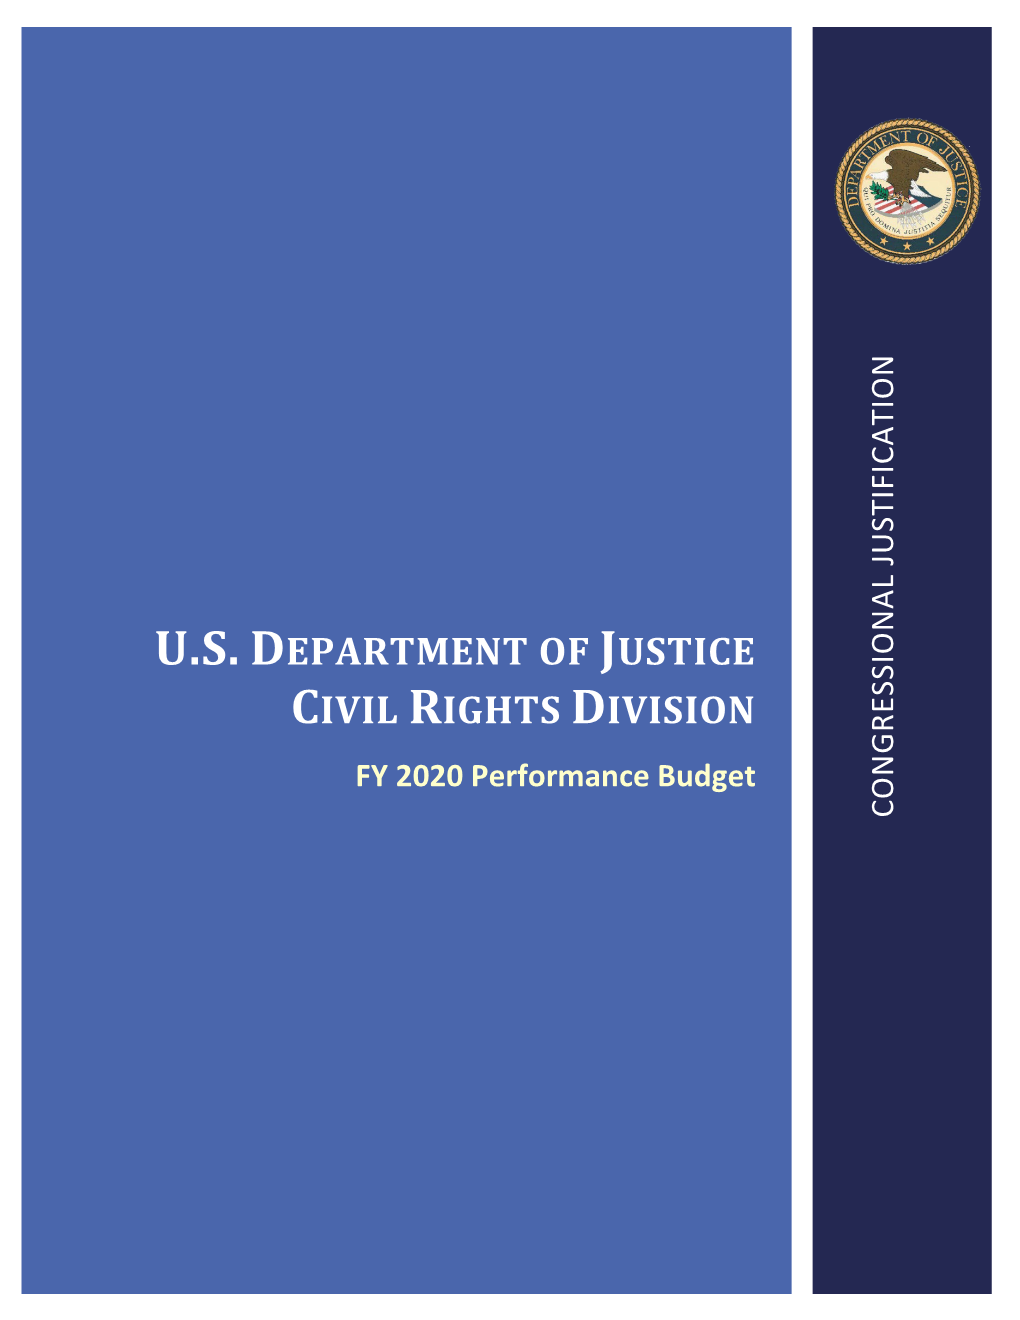 U.S. DEPARTMENT of JUSTICE CIVIL RIGHTS DIVISION FY 2020 Performance Budget ICATION JUSTIF CONGRESSIONAL